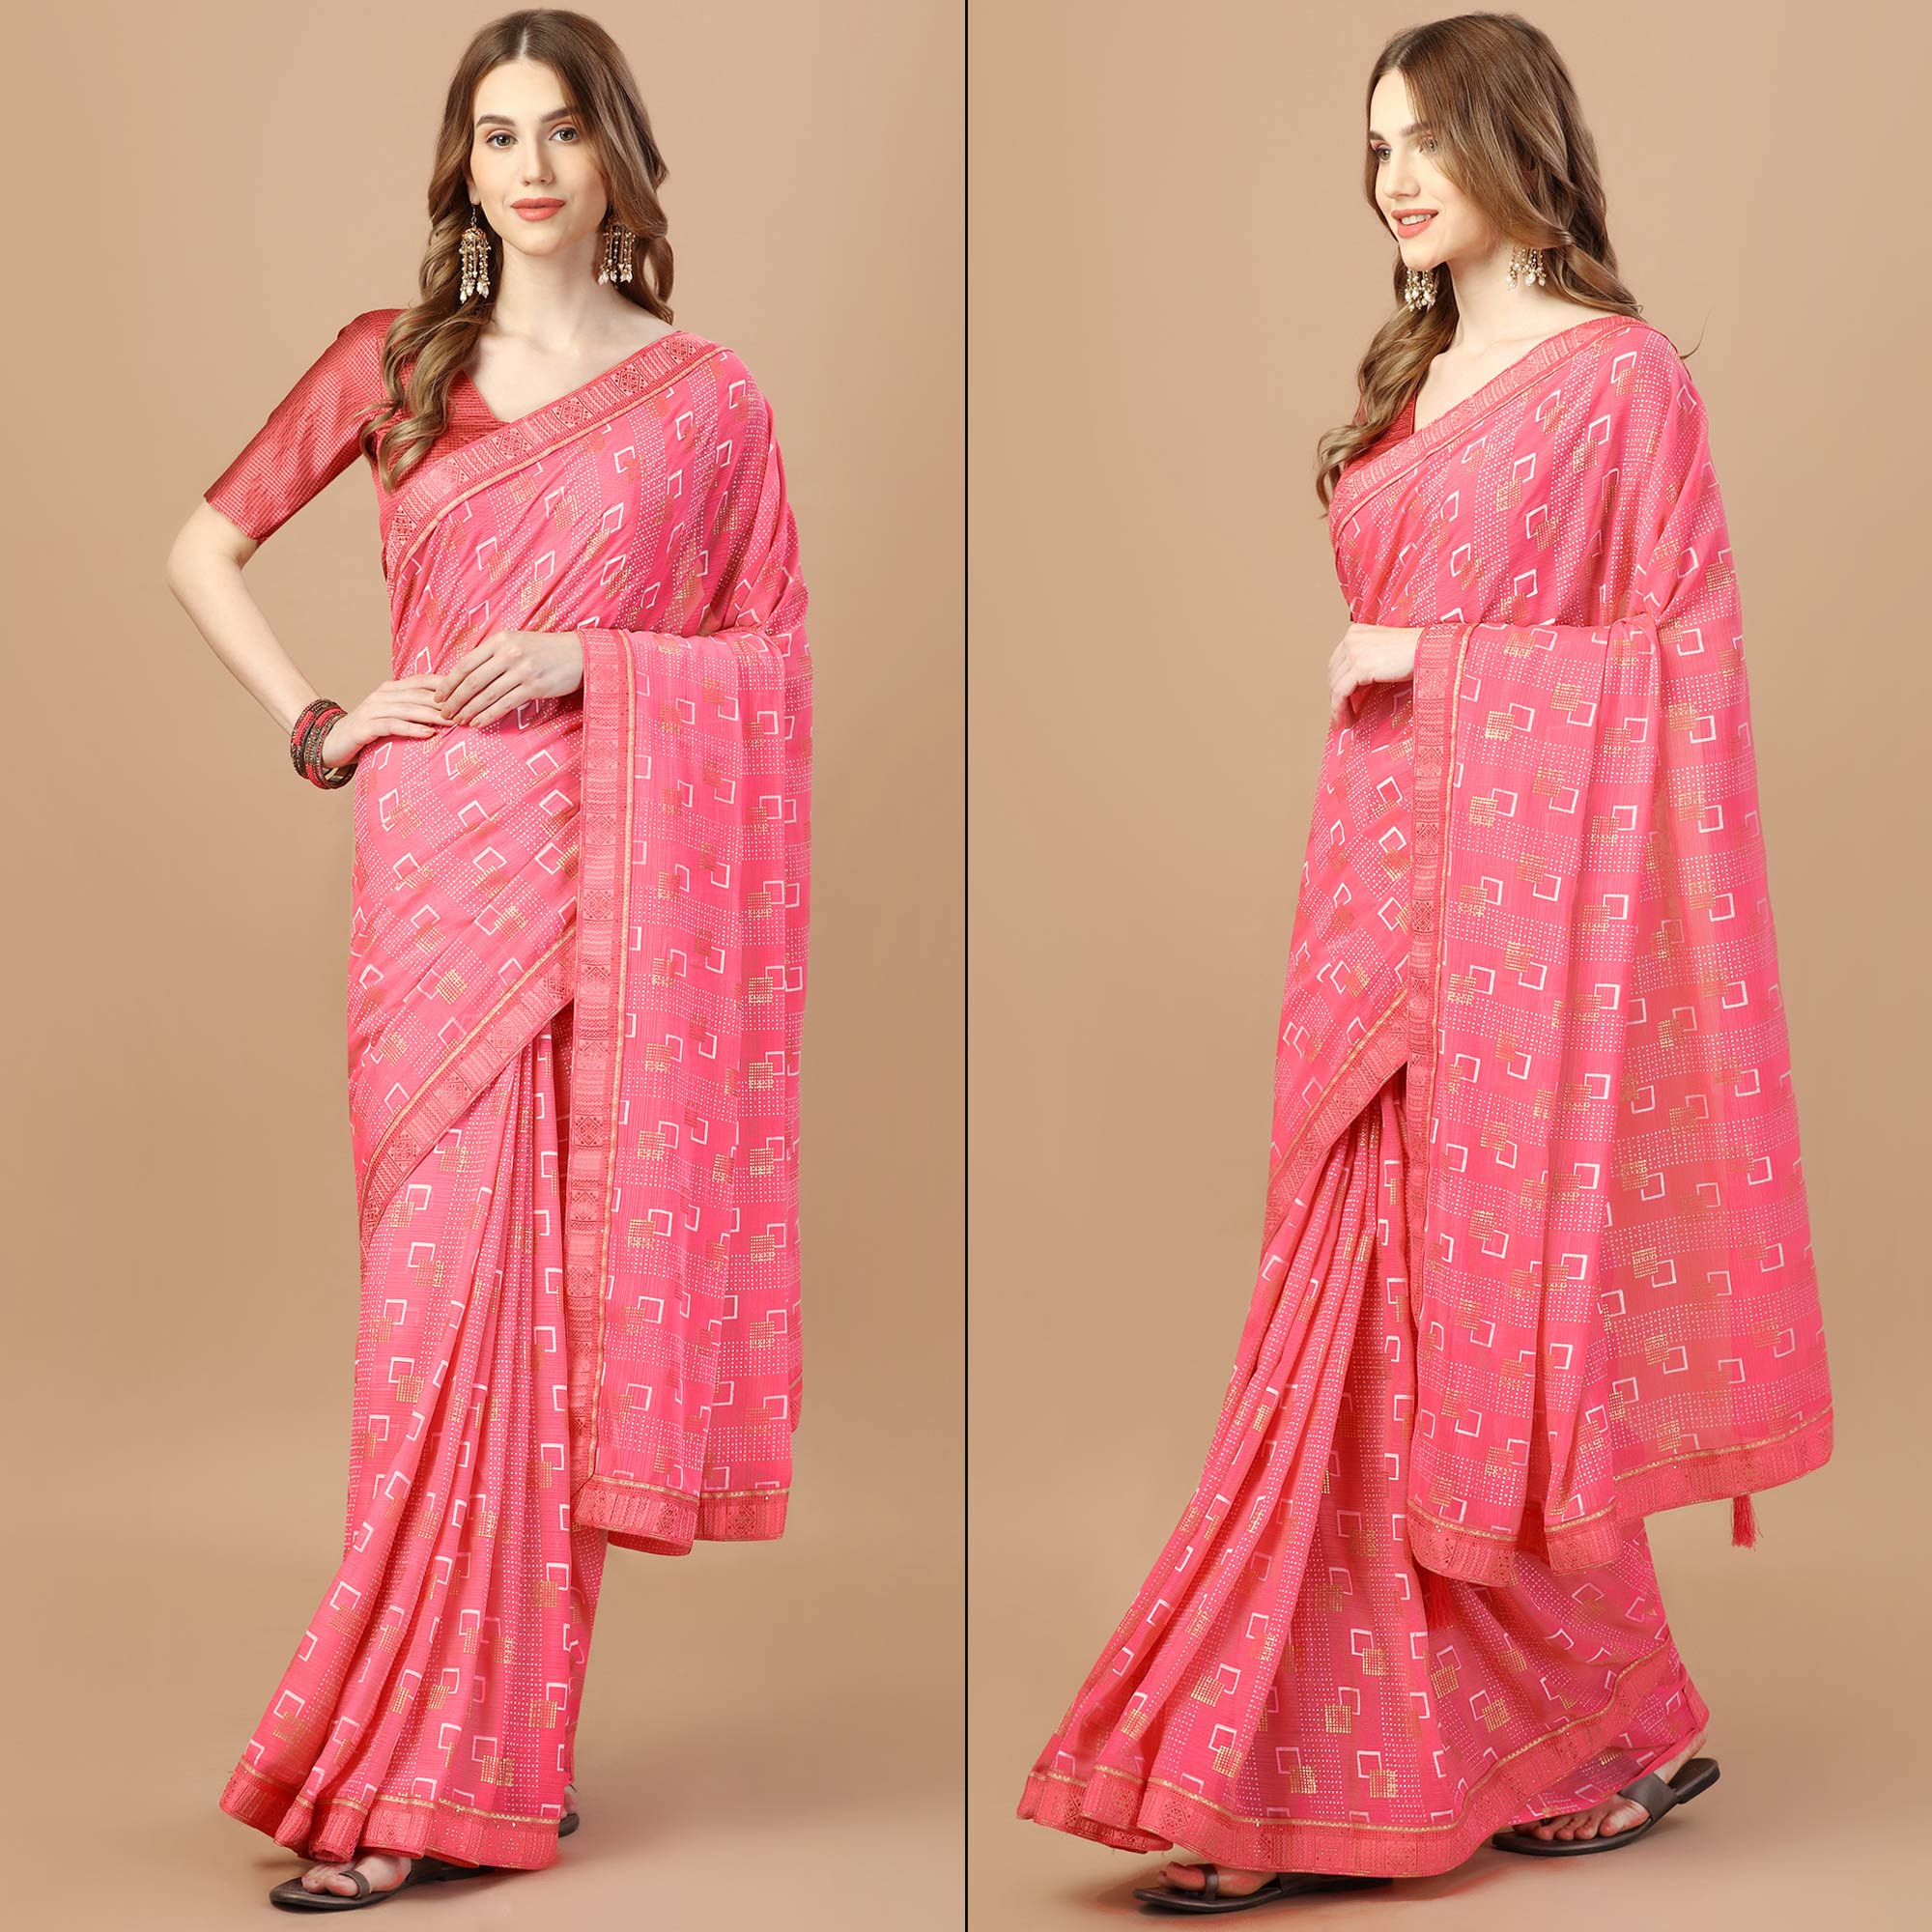 Baby Pink Foil Printed Chiffon Saree With Lace Border